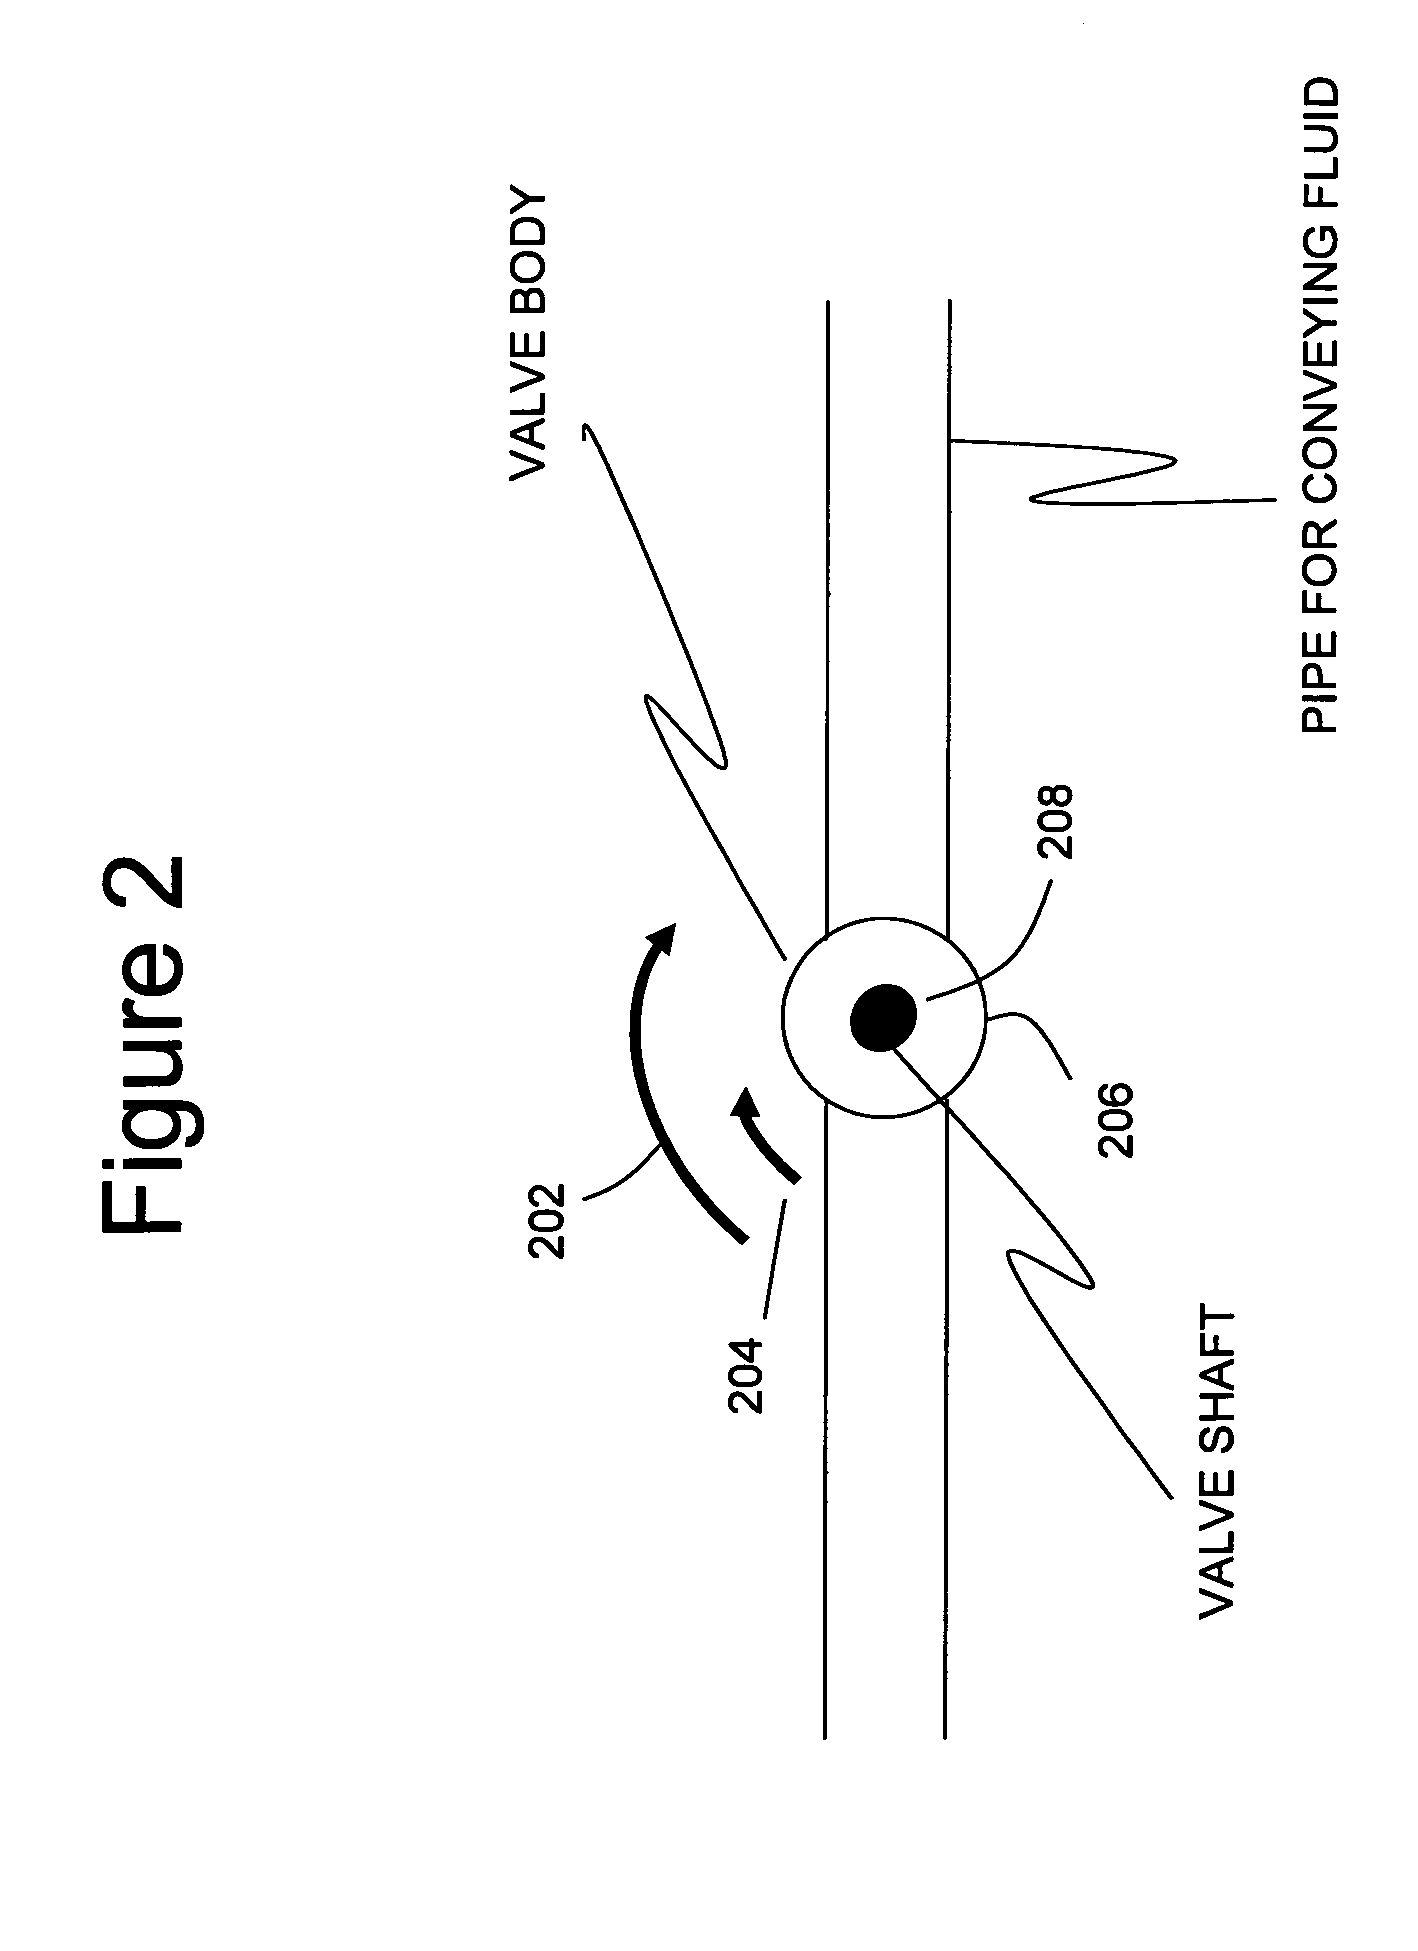 Methods to monitor system sensor and actuator health and performance